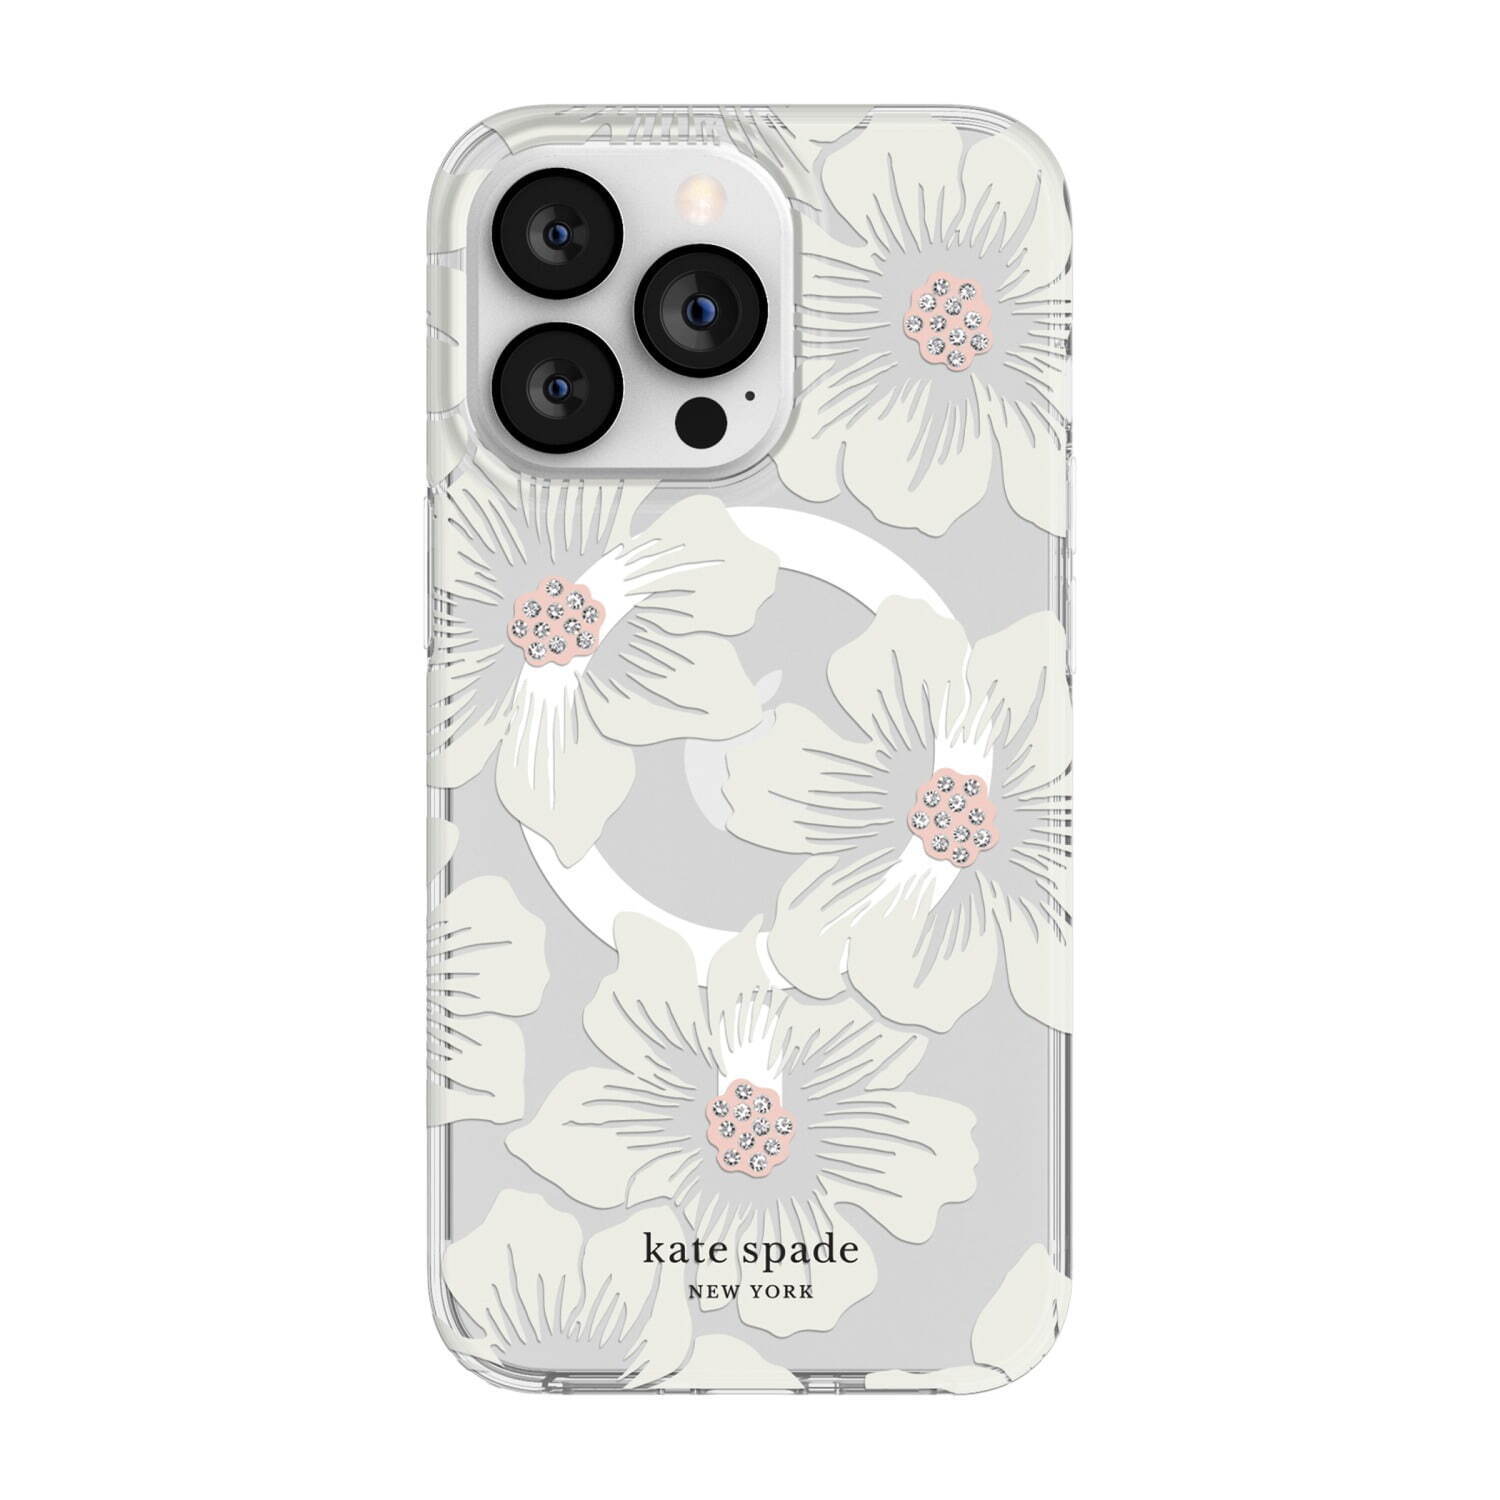 Protective Hardshell Case for MagSafe  5,830円(参考価格)
「Hollyhock Floral」はiPhone 13 Pro/iPhone 13に対応